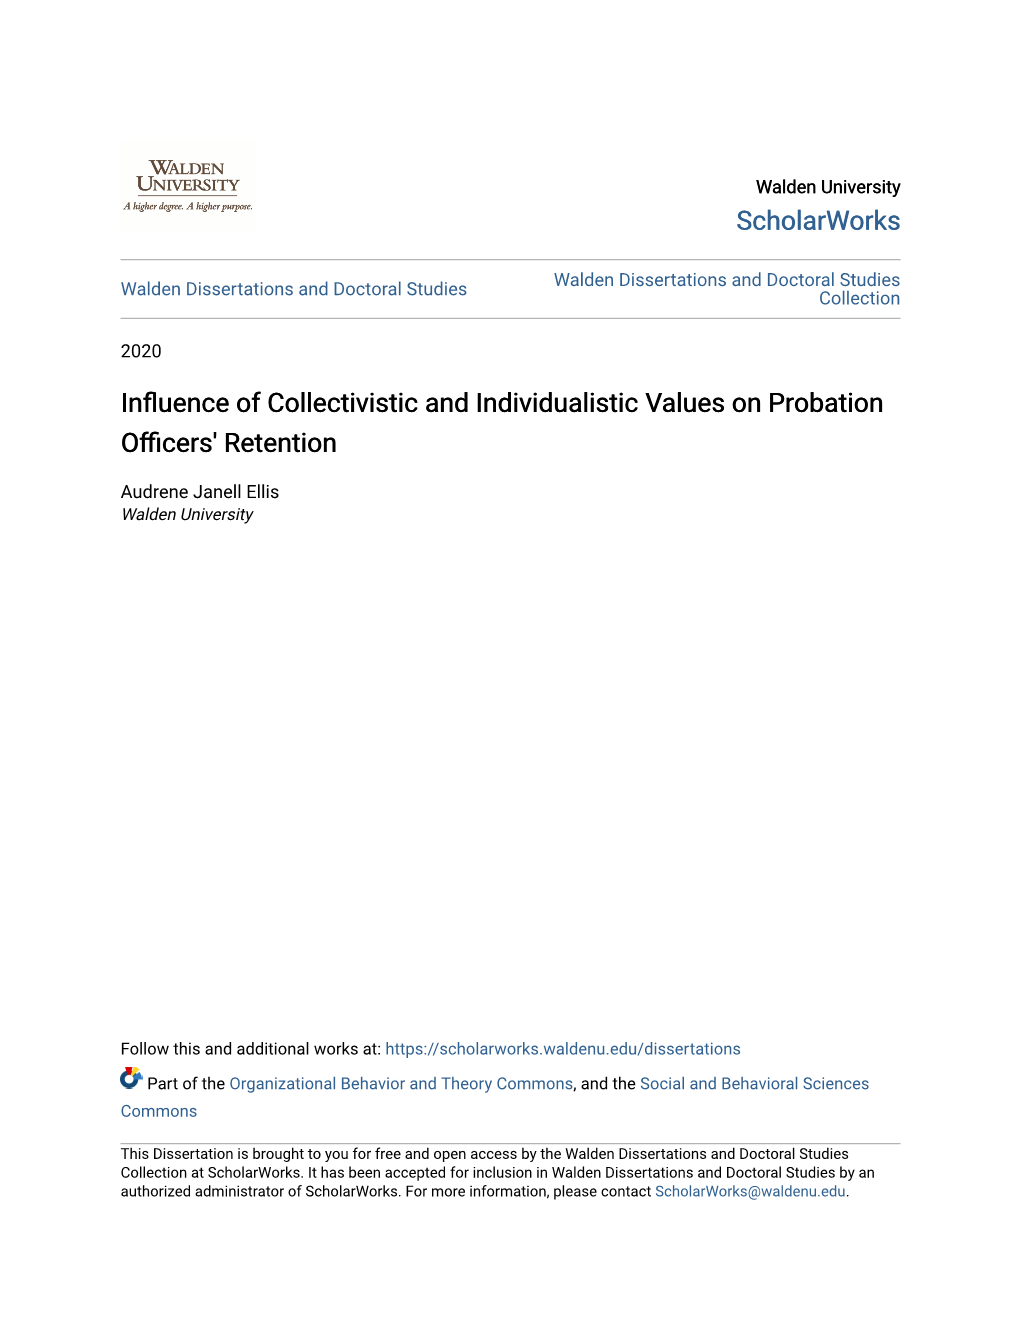 Influence of Collectivistic and Individualistic Values on Probation Officers’ Retention